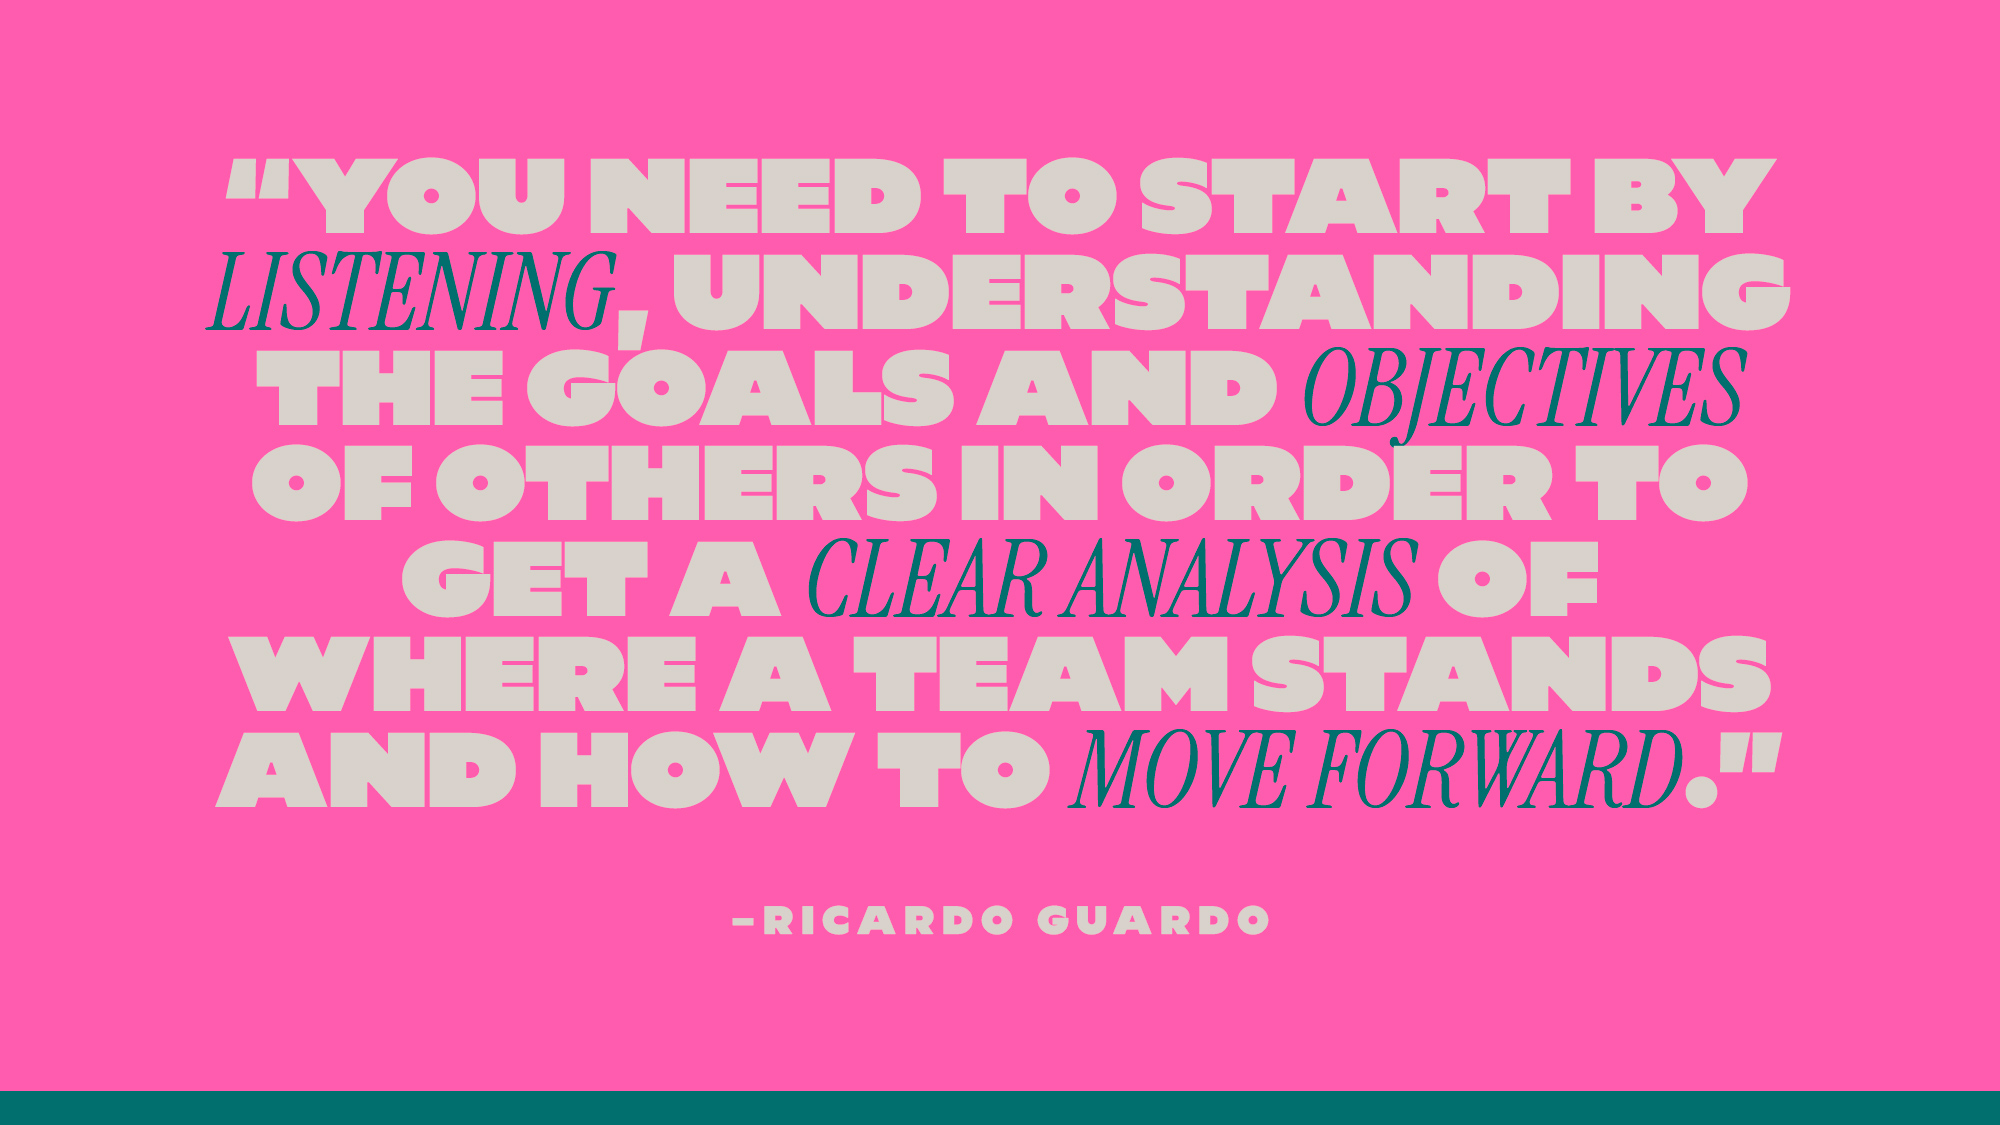 “You need to start by listening, understanding the goals and objectives of others in order to get a clear analysis of where a team stands and how to move forward.” — Ricardo Guardo